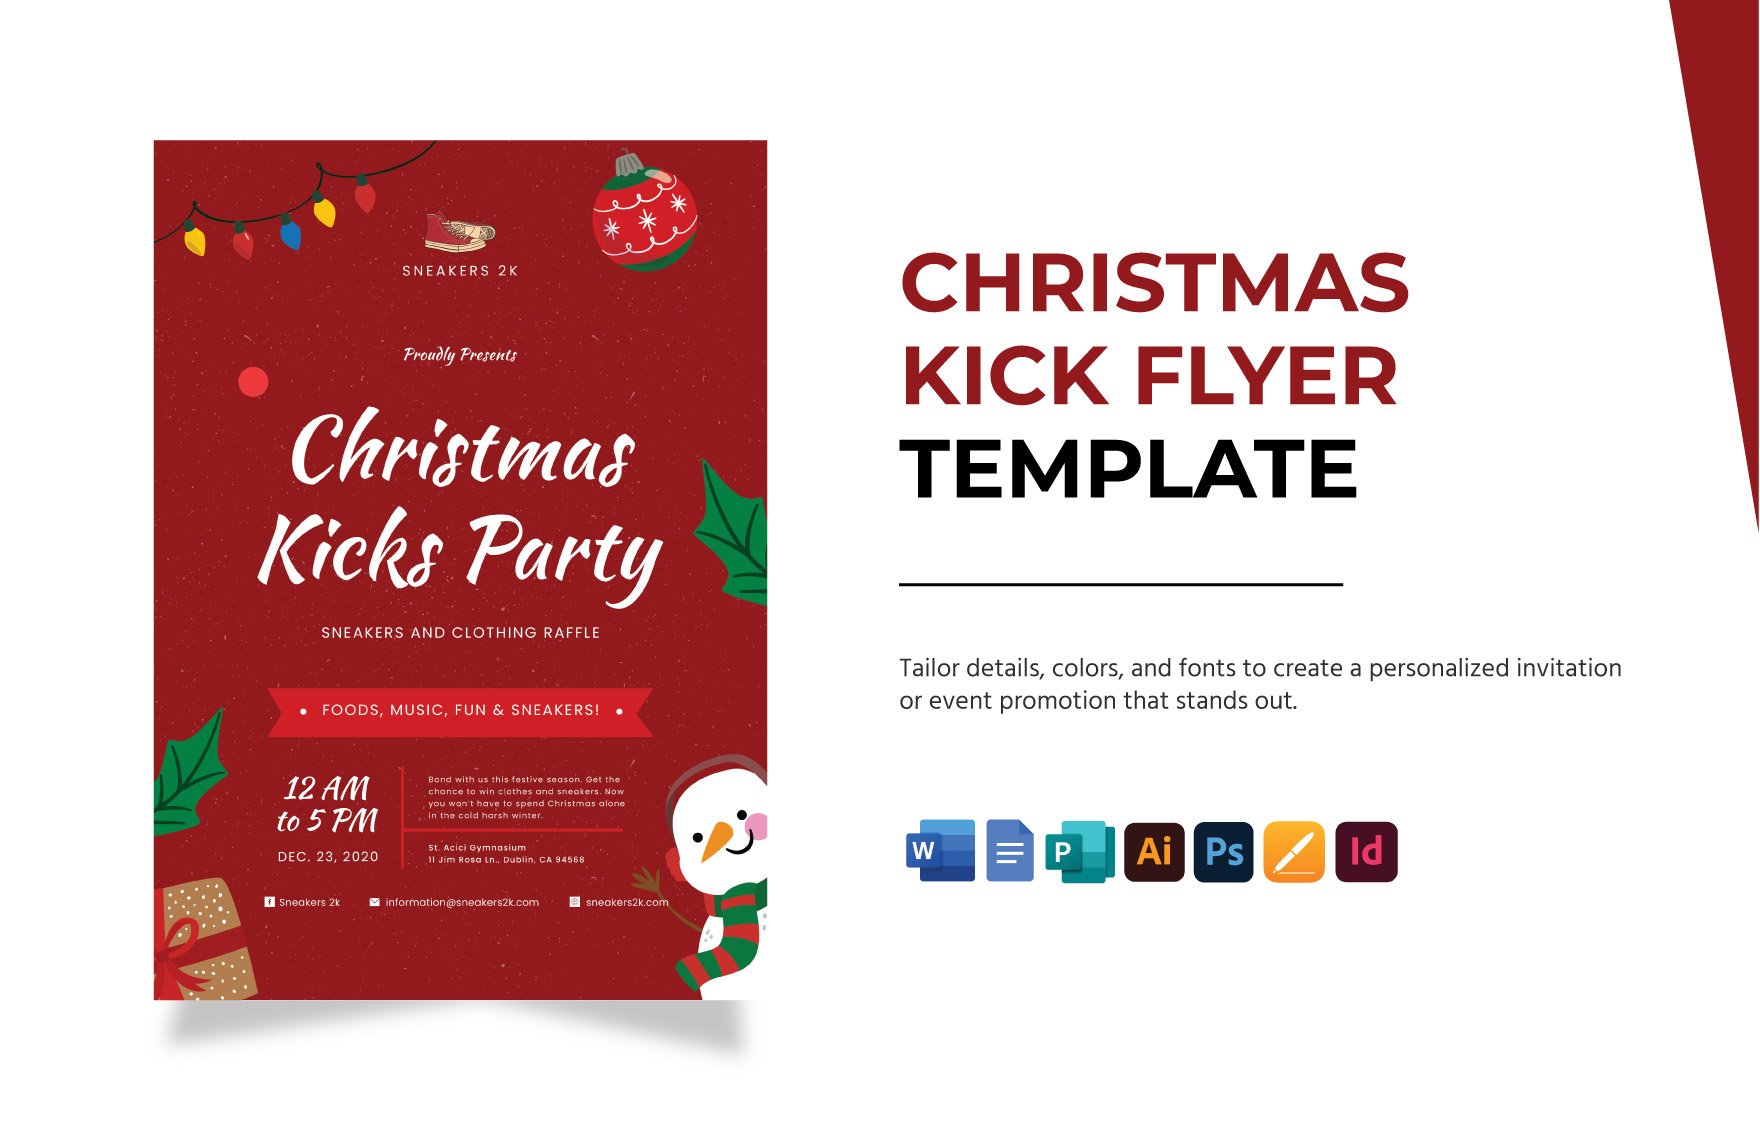 Christmas Kicks Flyer Template in Word, Google Docs, Illustrator, PSD, Apple Pages, Publisher, InDesign